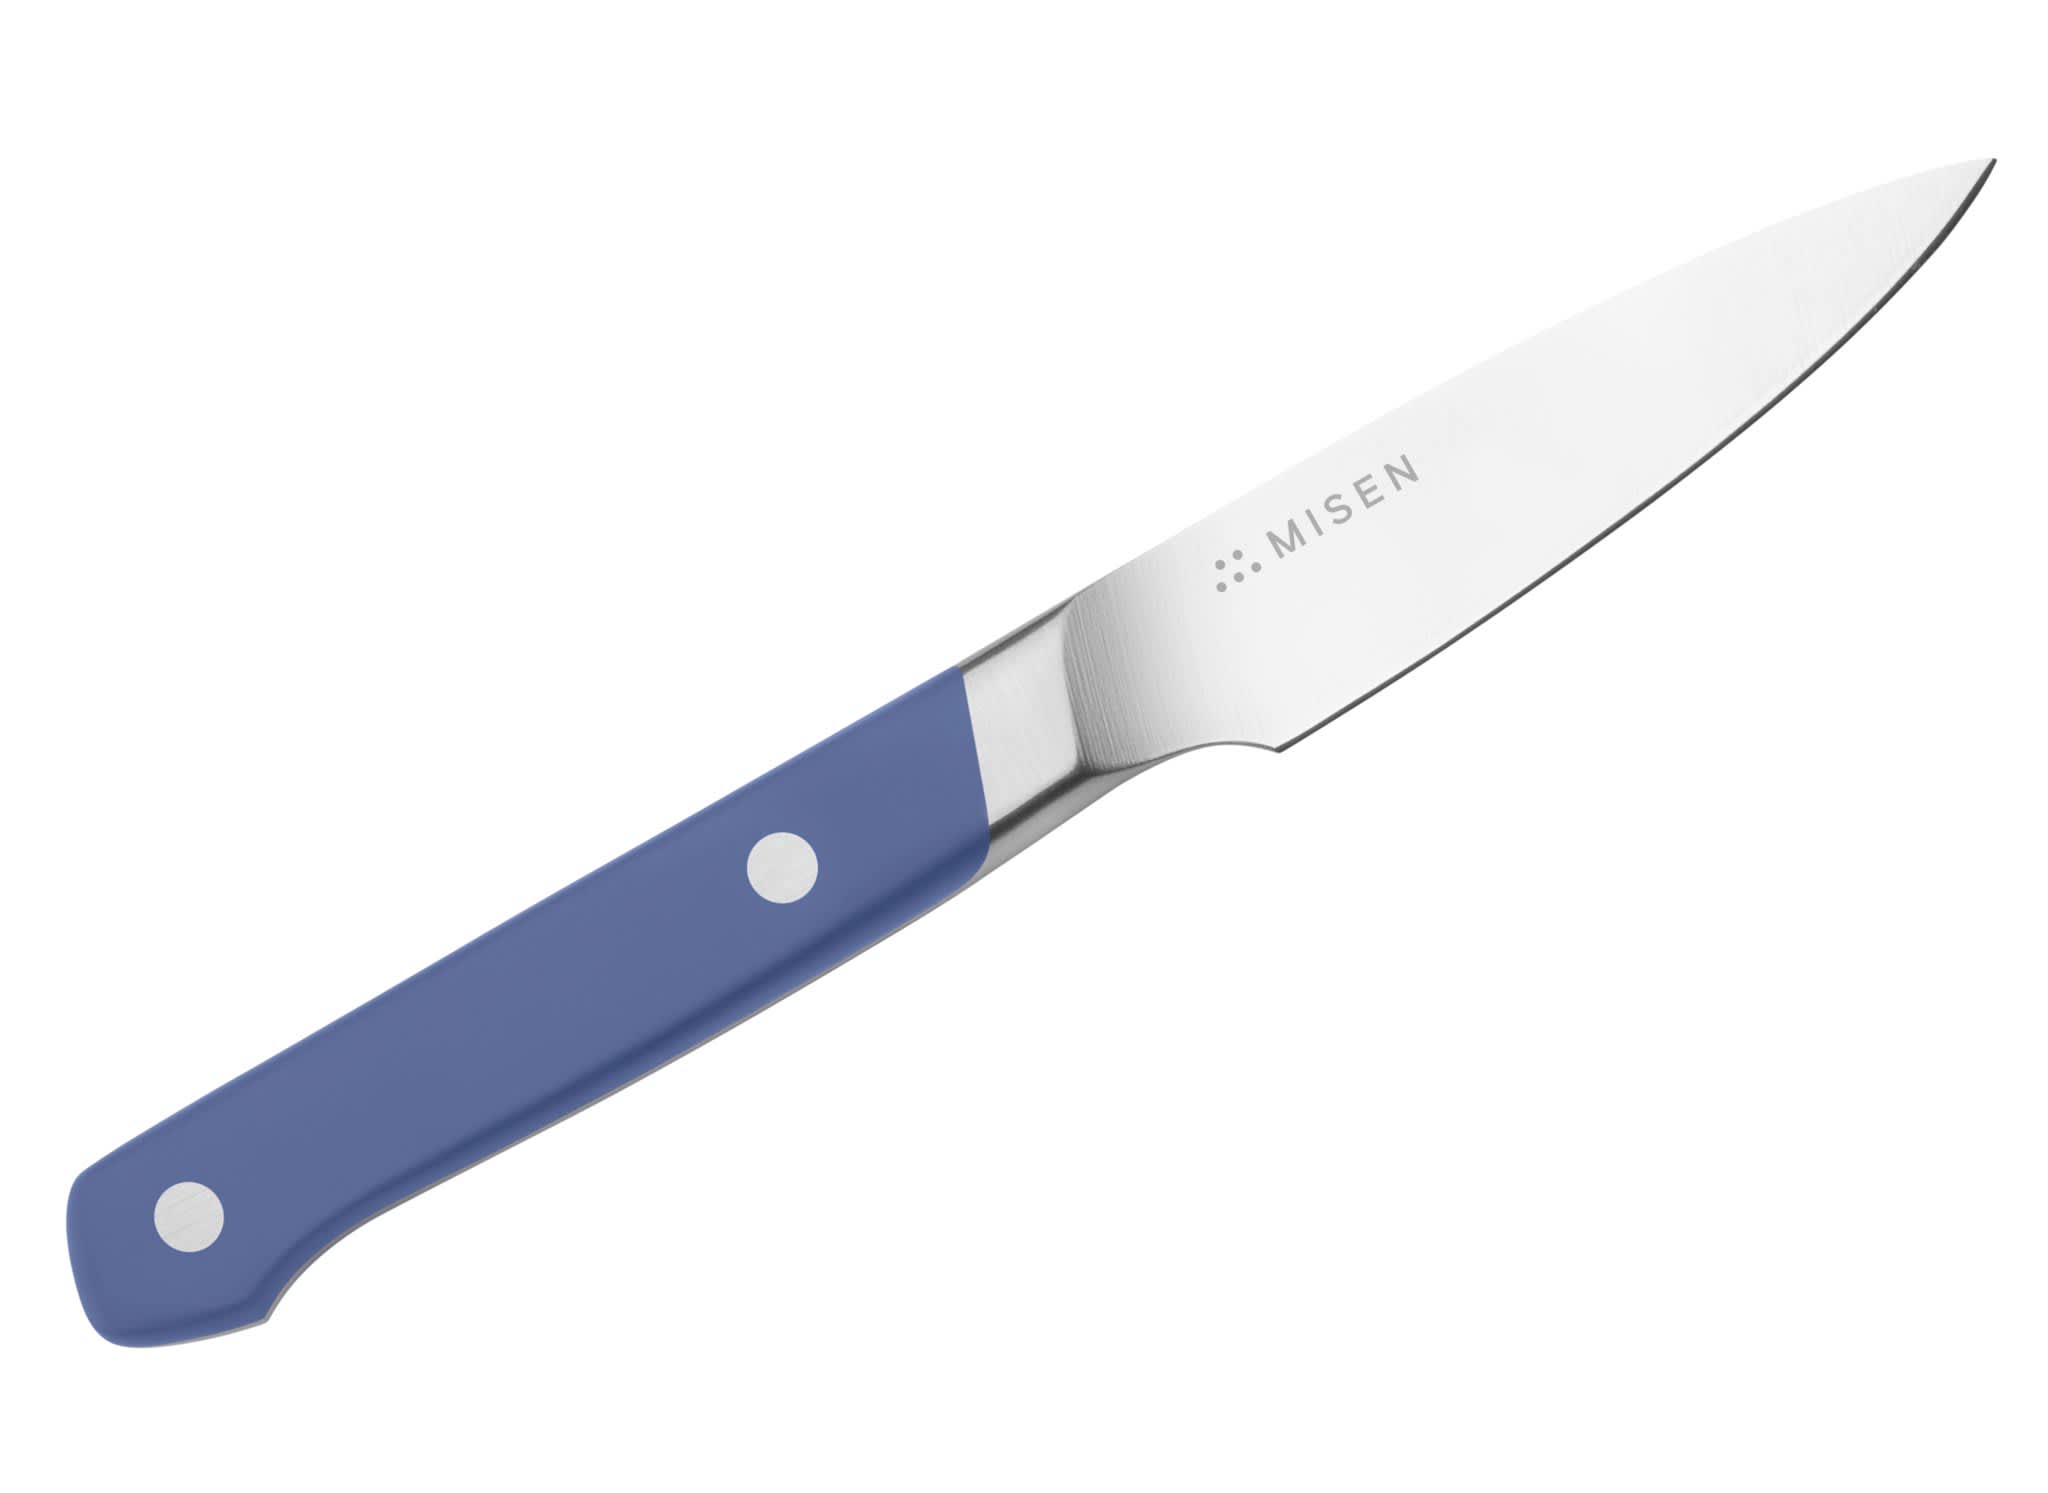 https://cdn.apartmenttherapy.info/image/upload/v1624367803/gen-workflow/product-database/paring-knife-blue-191015-angle1-new_2048x.jpg